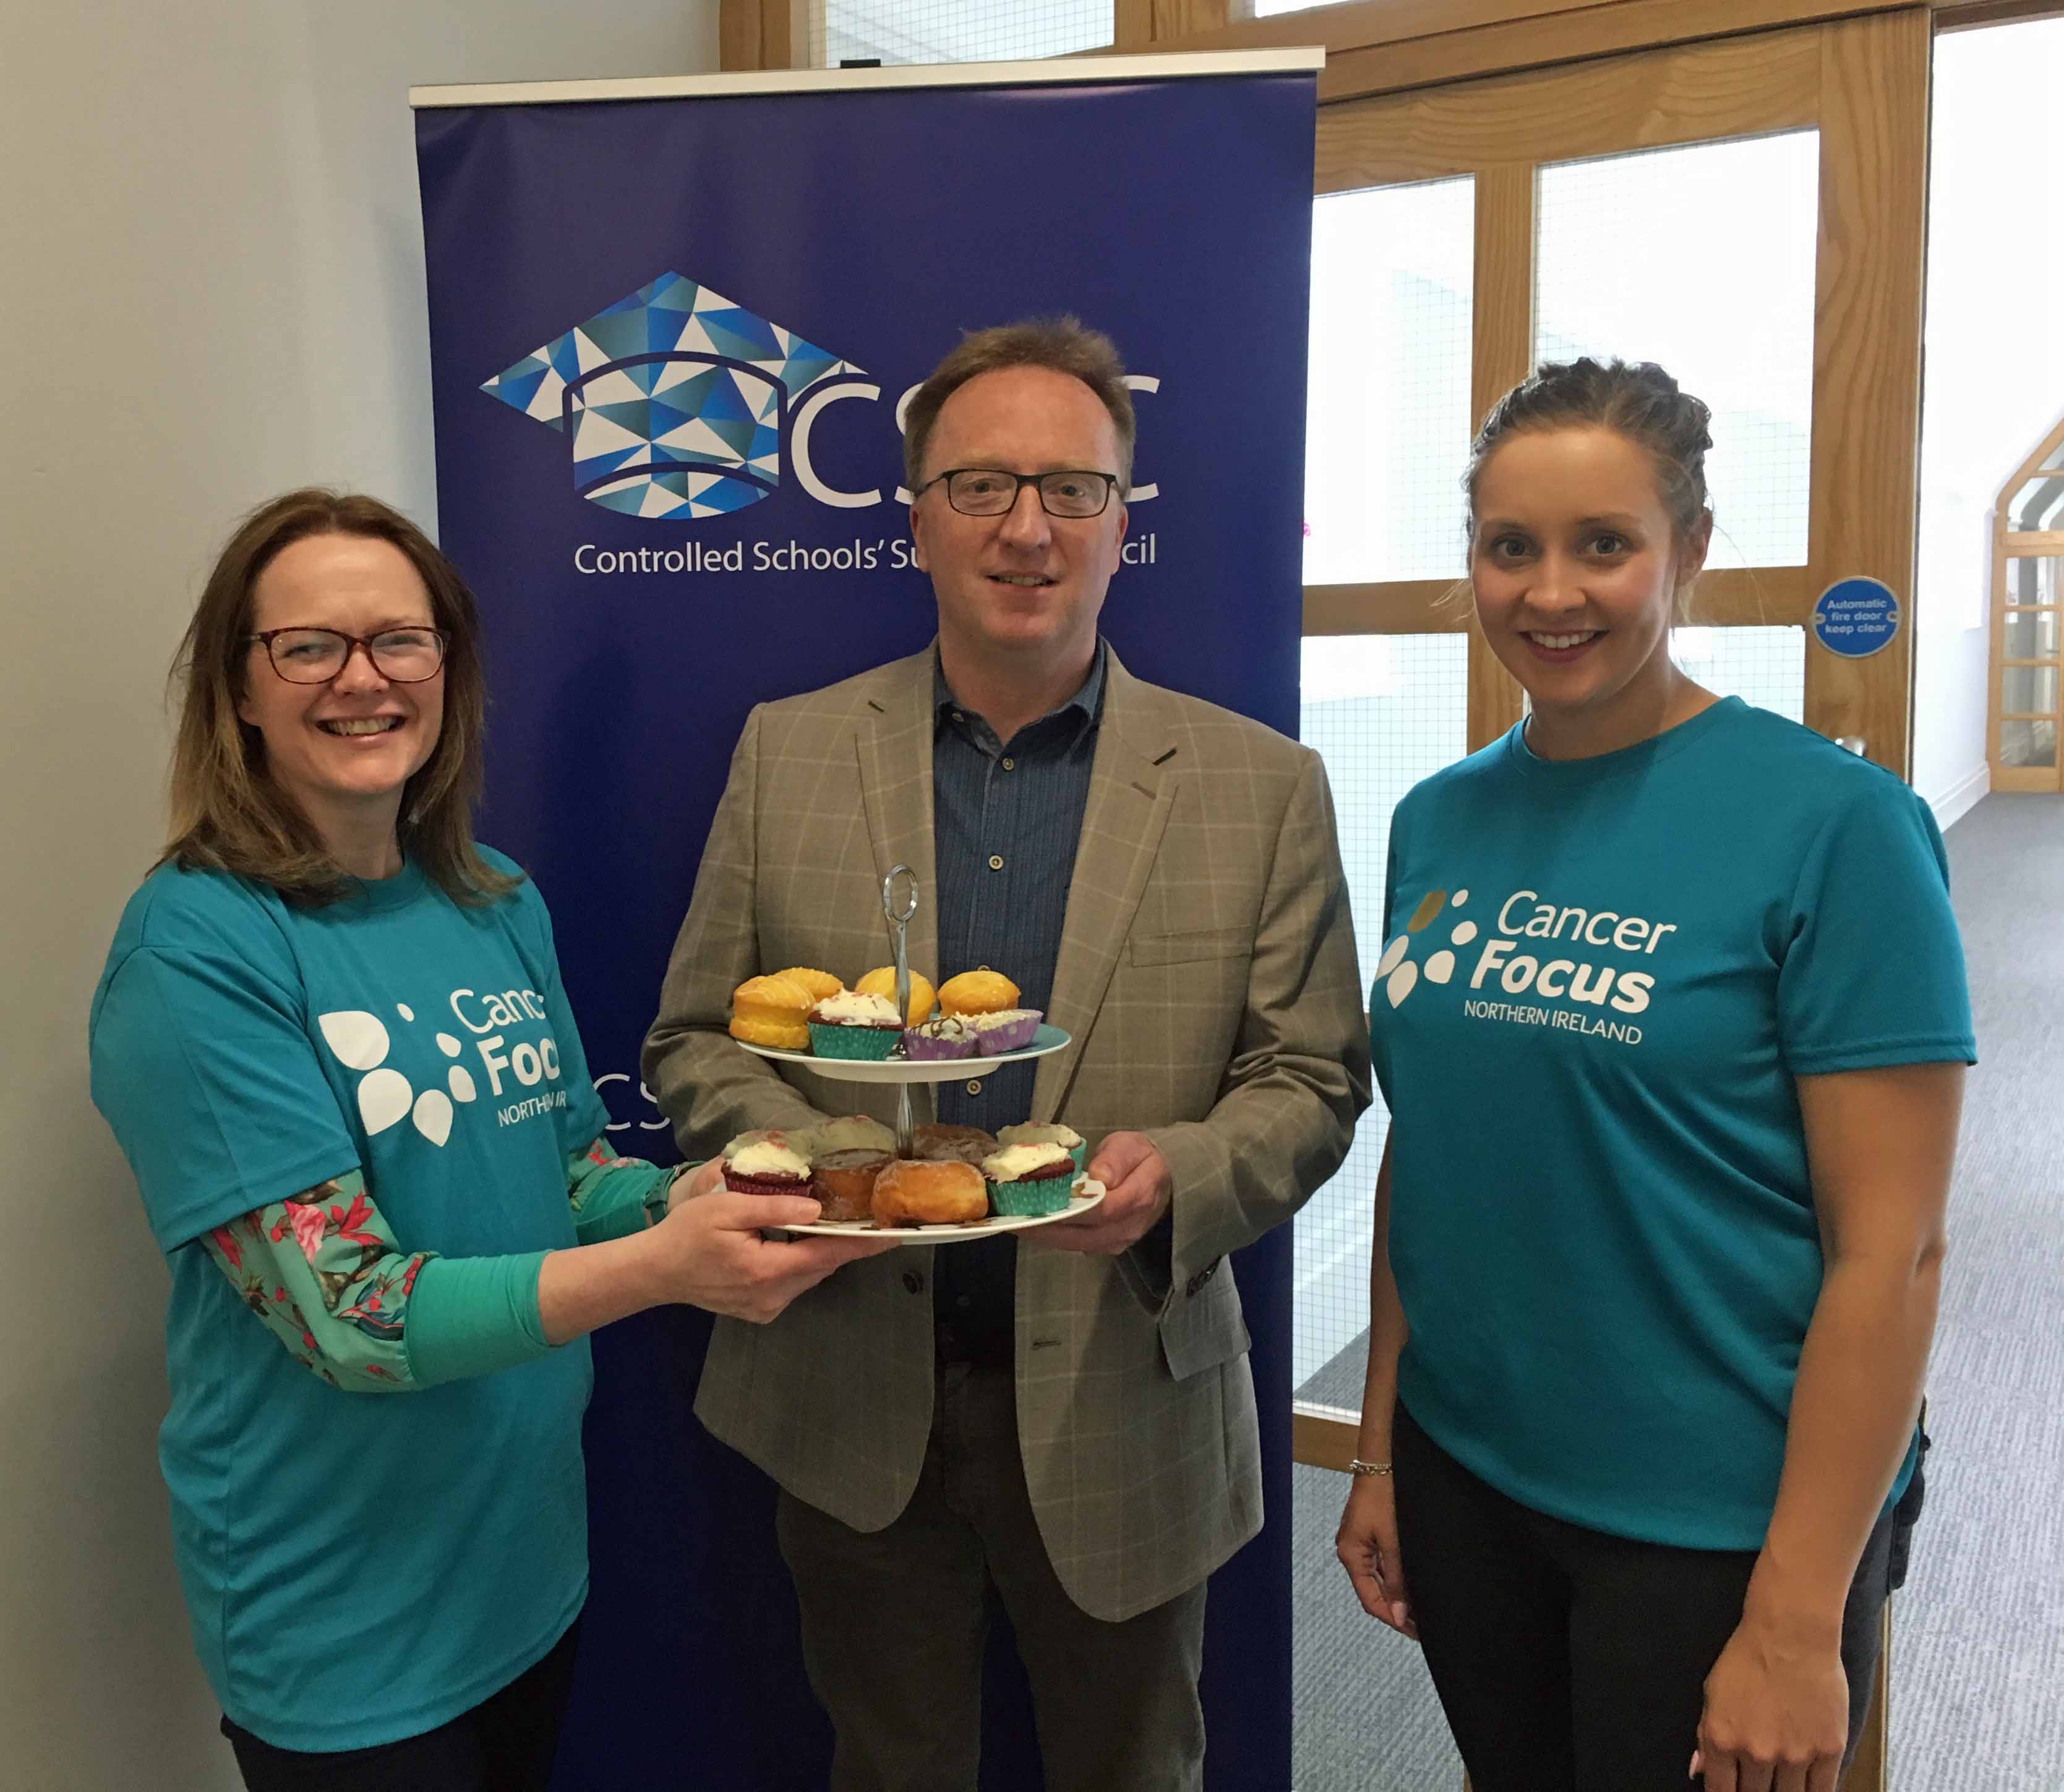 Sara McCracken (CSSC Head of Marketing, Research and Communications), Peter Hamill (CSSC Board Member) and Louise Greer (Corporate Fundraising Officer, Cancer Focus NI).